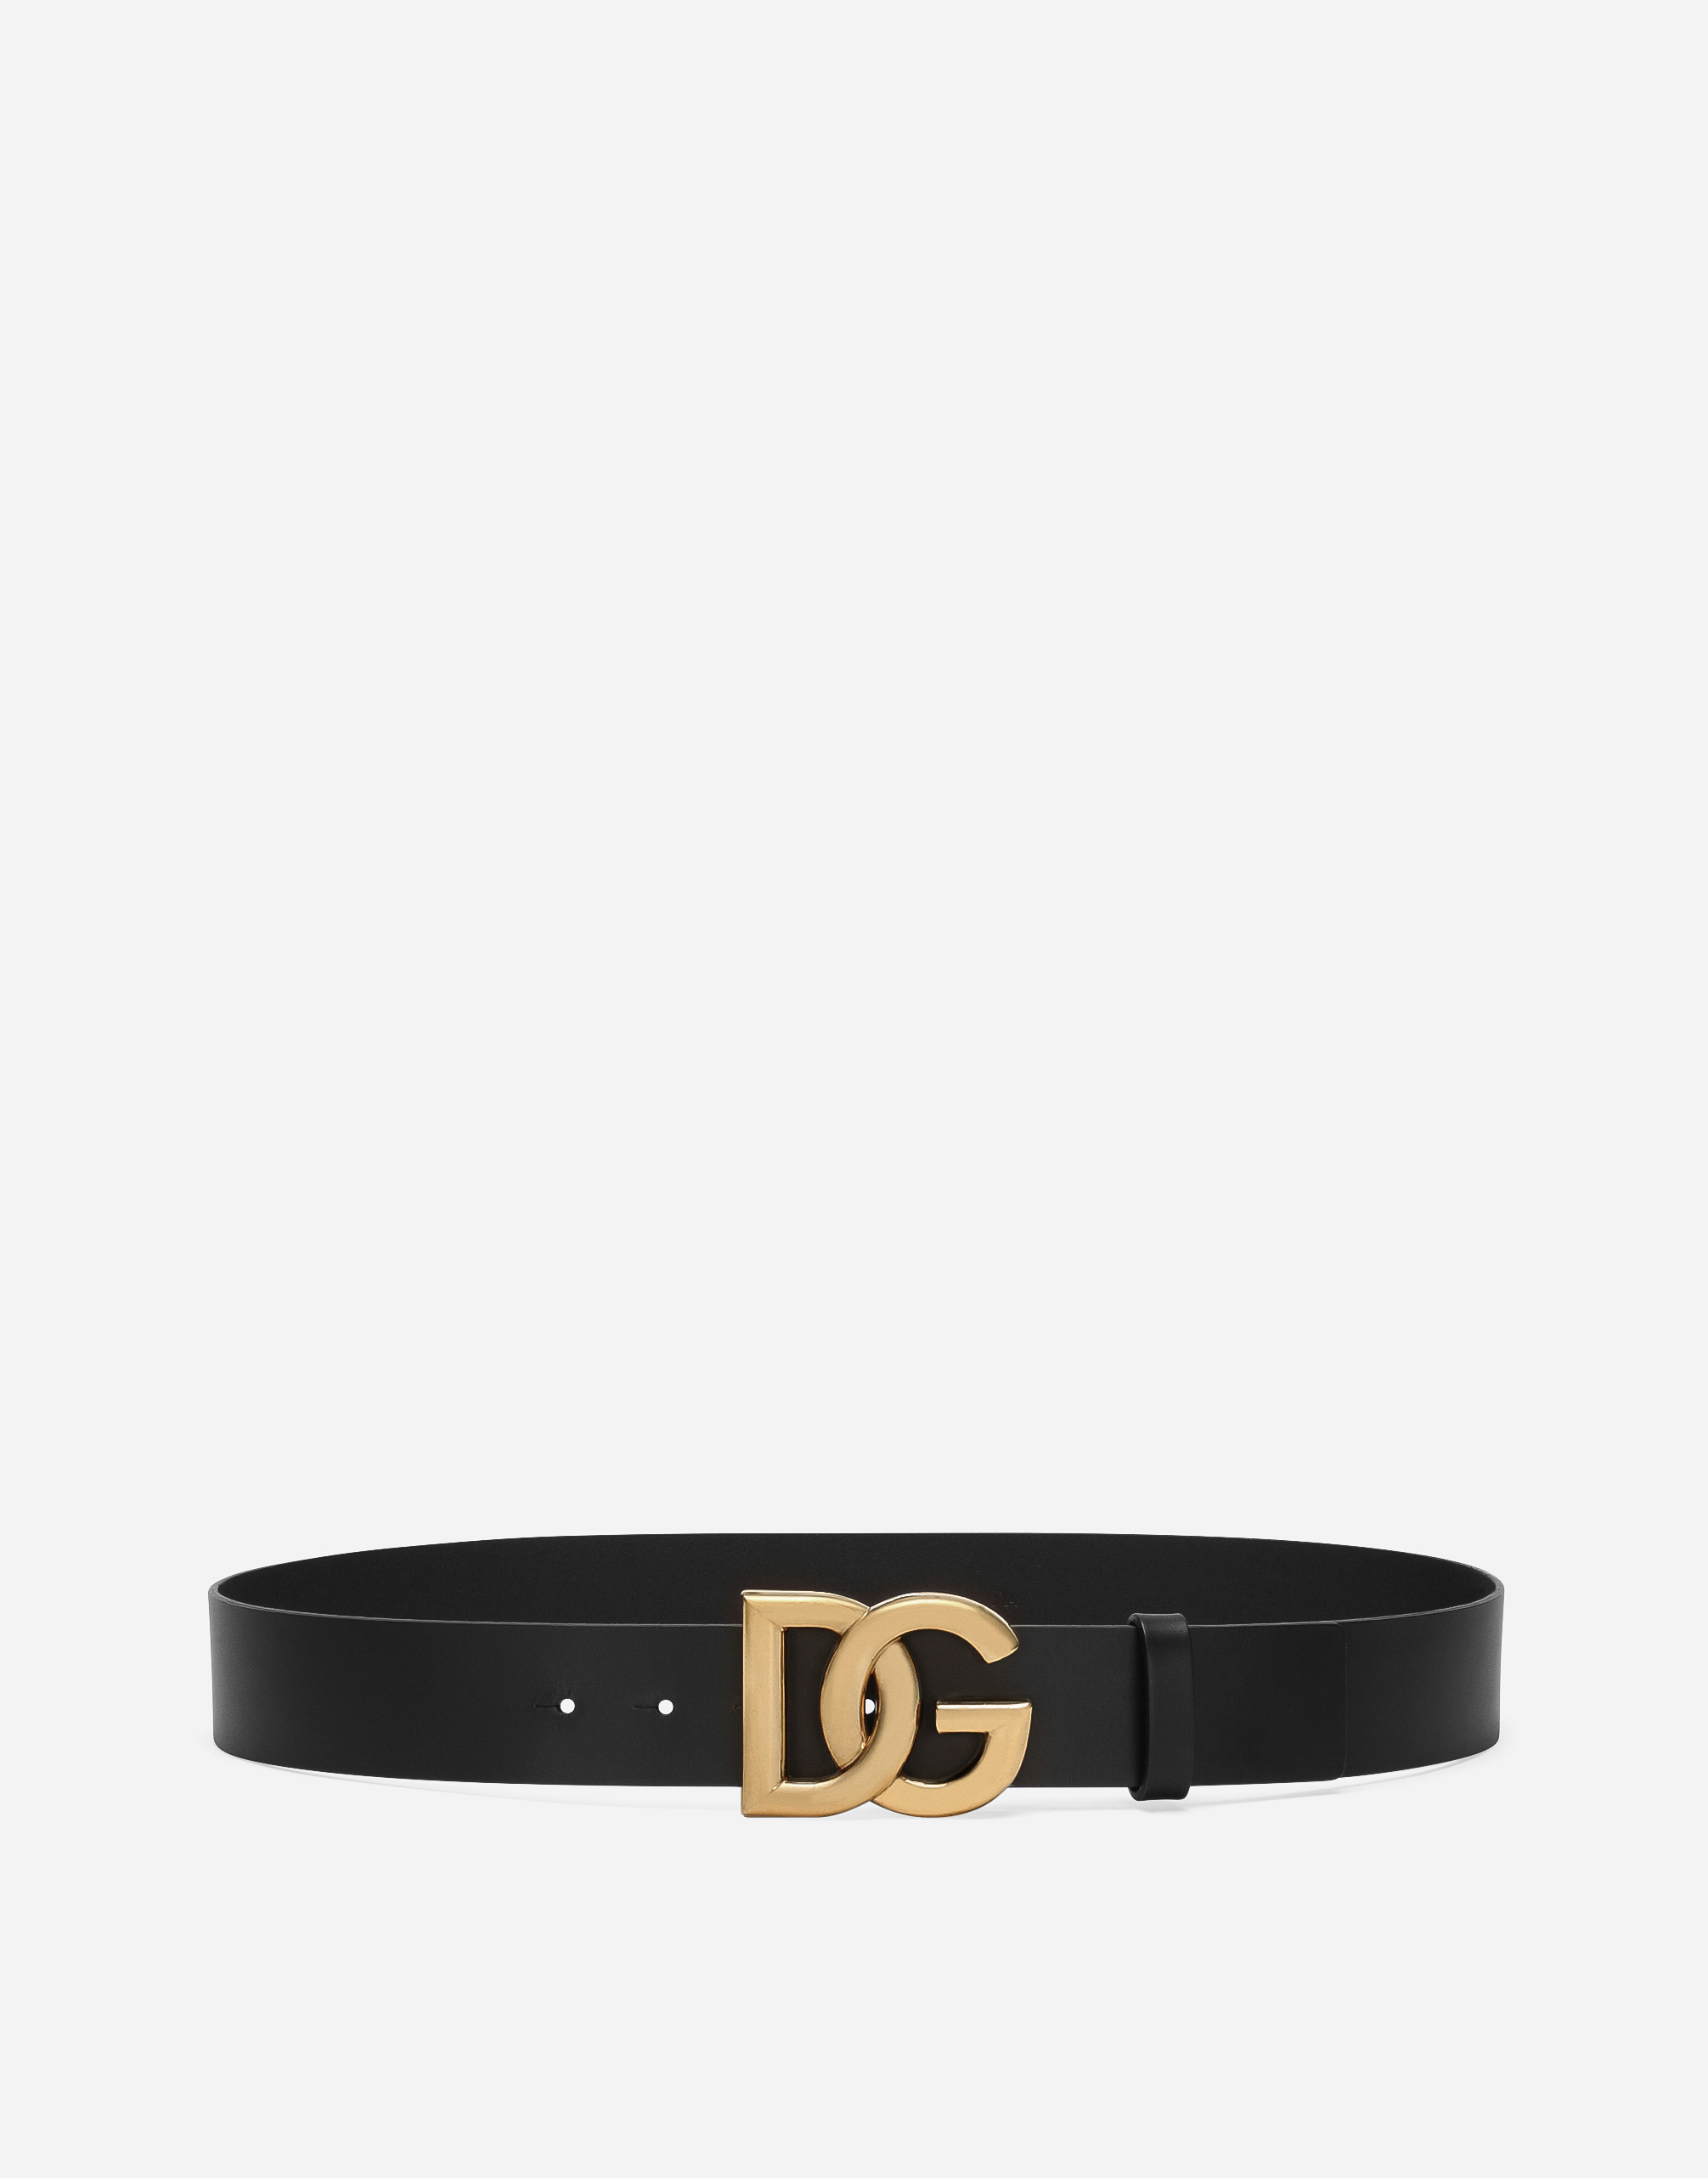 Lux leather belt with crossover DG logo buckle in Multicolor